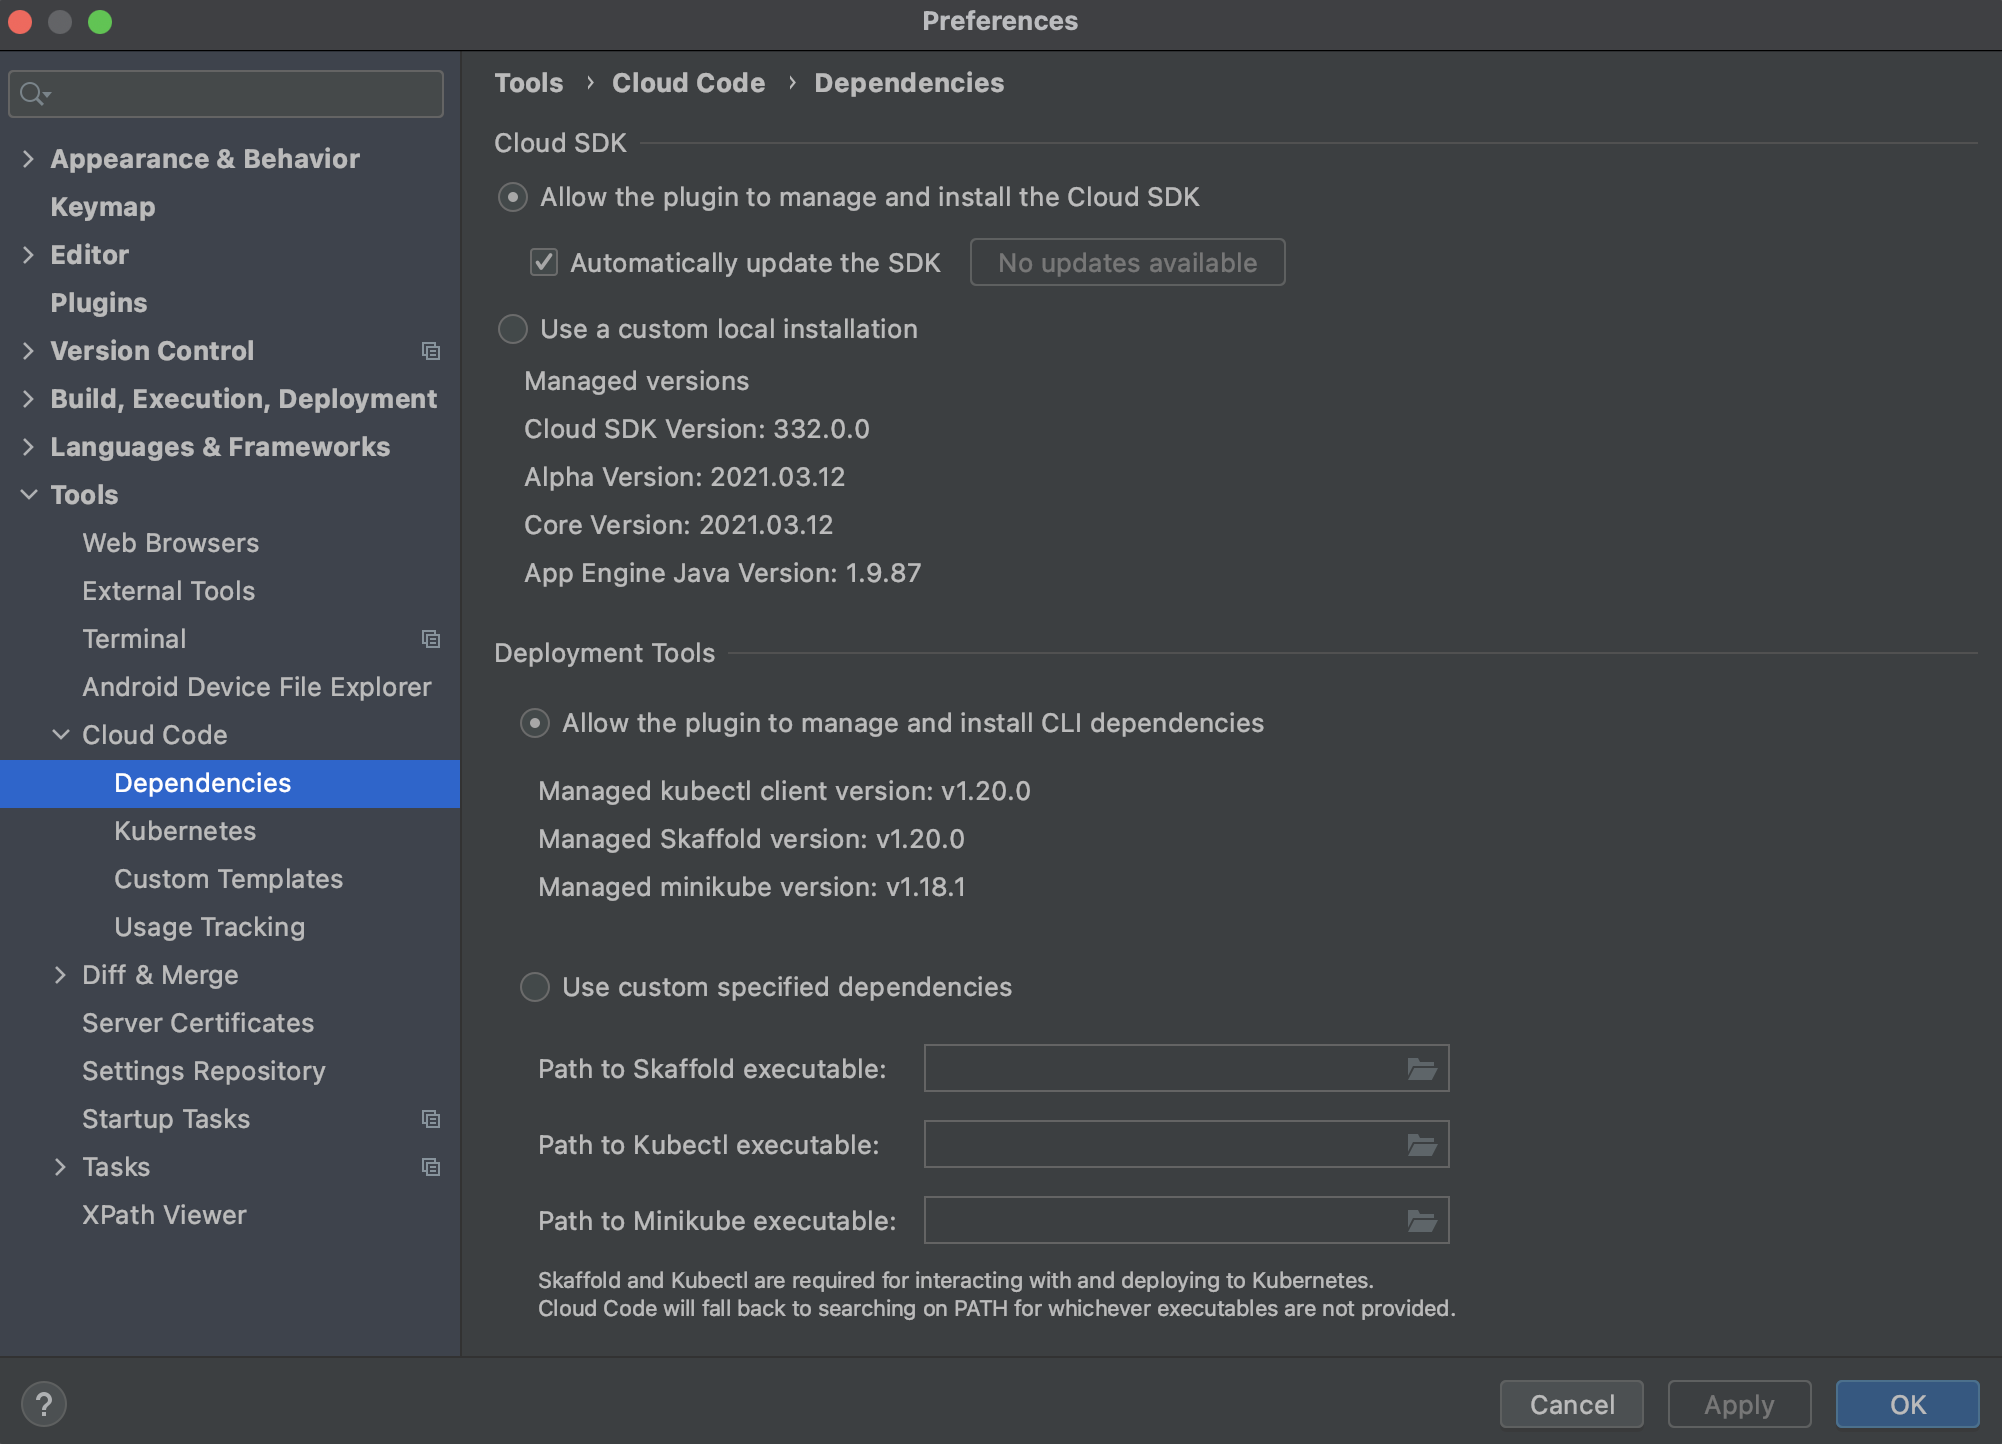 The Preferences dialog with Cloud Code and its underlying Dependencies
     section selected. The main area shows the version number of the gcloud CLI. The
     dialog also shows a field for browsing to a custom gcloud CLI installation, with an
     unselected radio button for choosing a gcloud CLI installation.